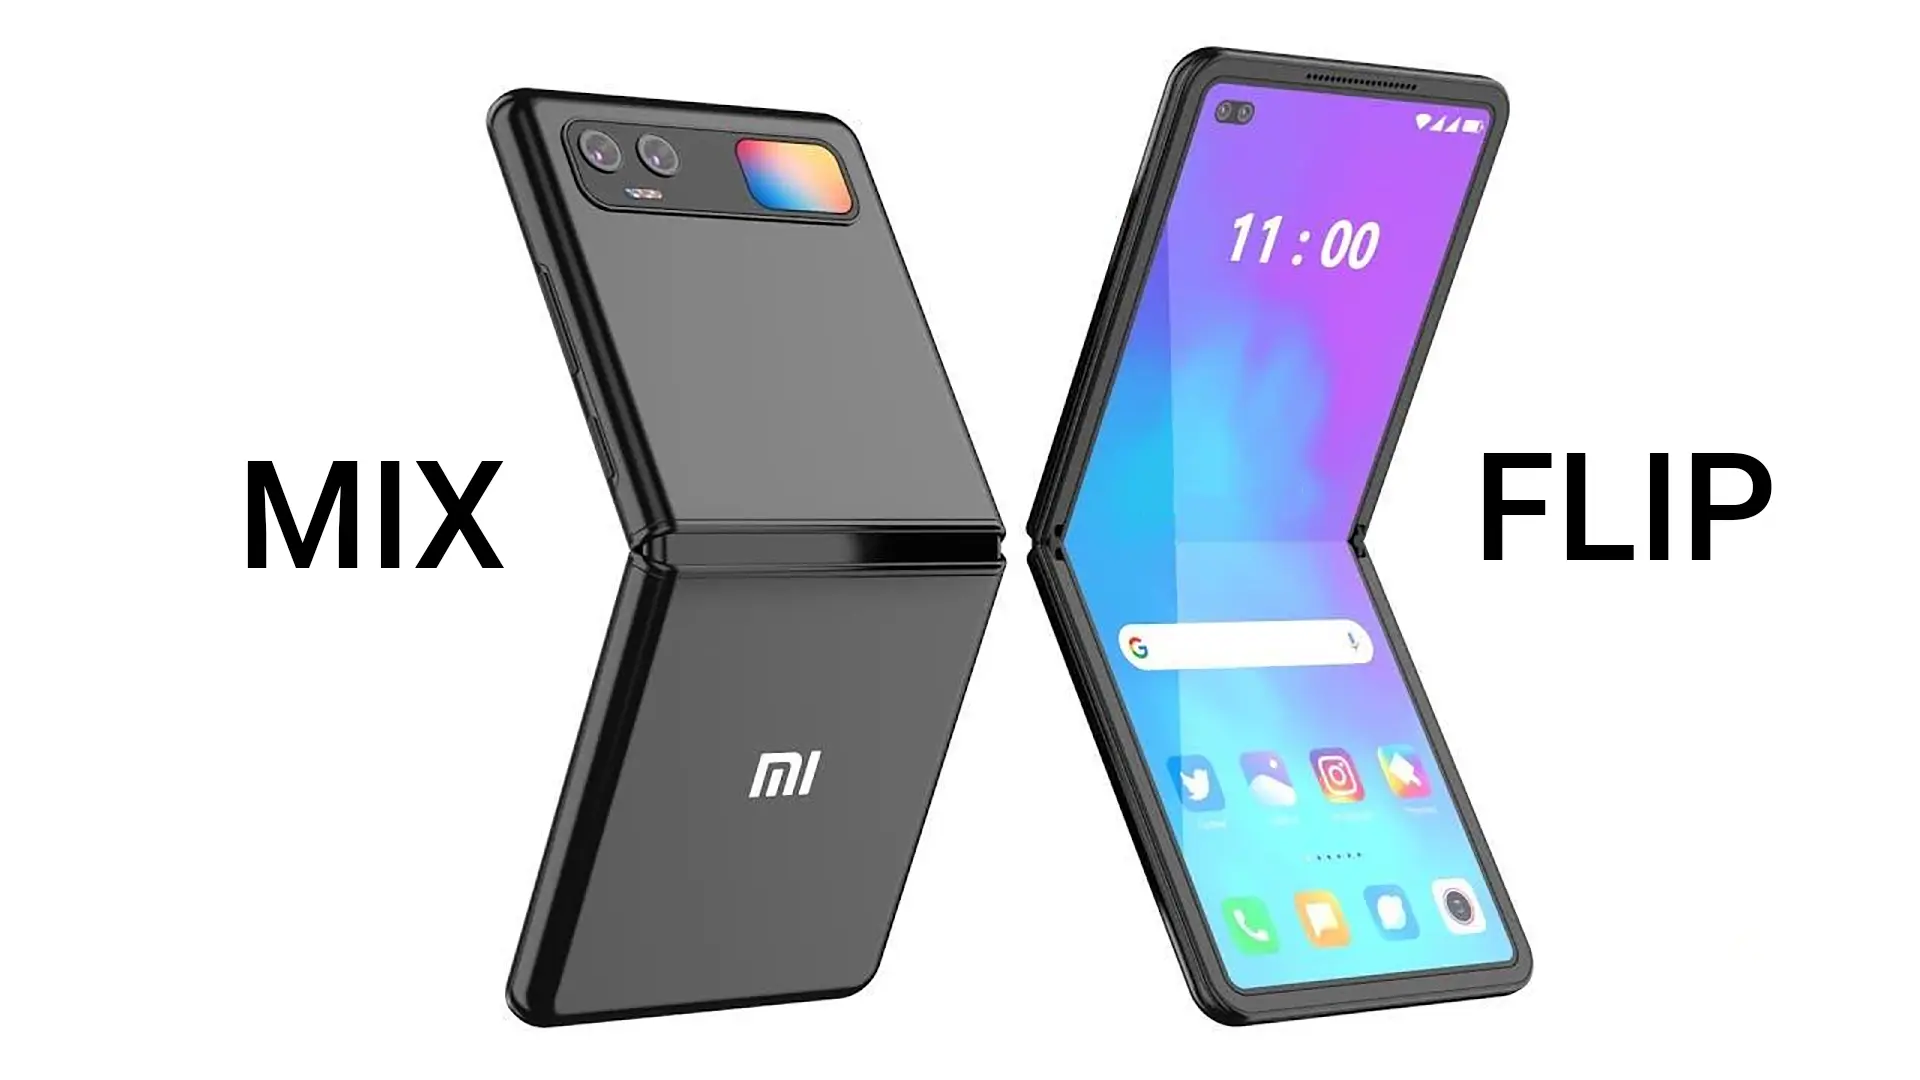 Perhaps the Xiaomi Mix Flip SD 8 Gen 3 this year will come with the processor